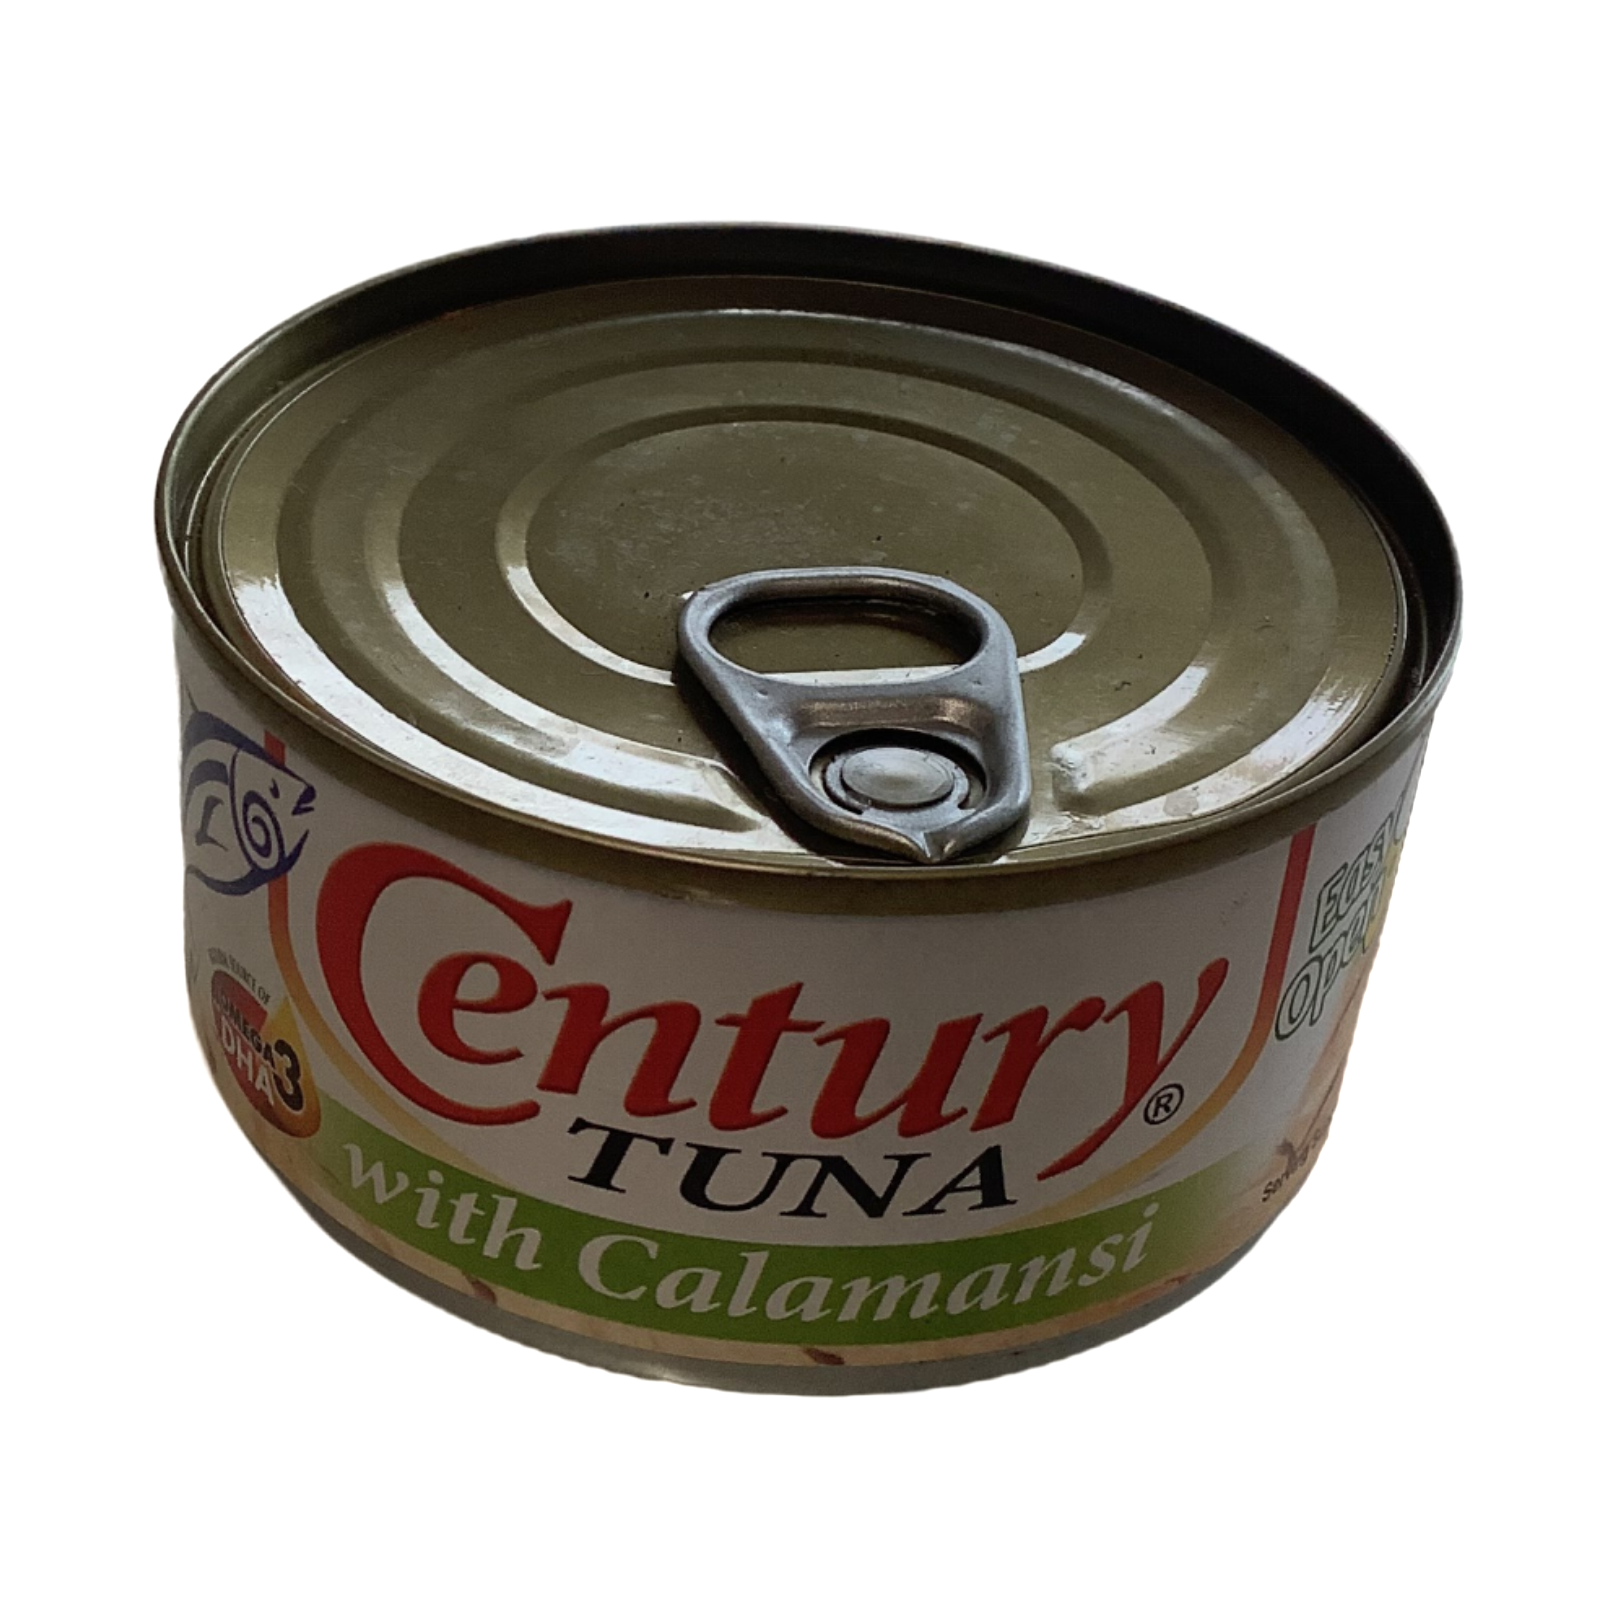 Century Tuna Flakes with Calamansi (Philippine Lime) Flavour 122g